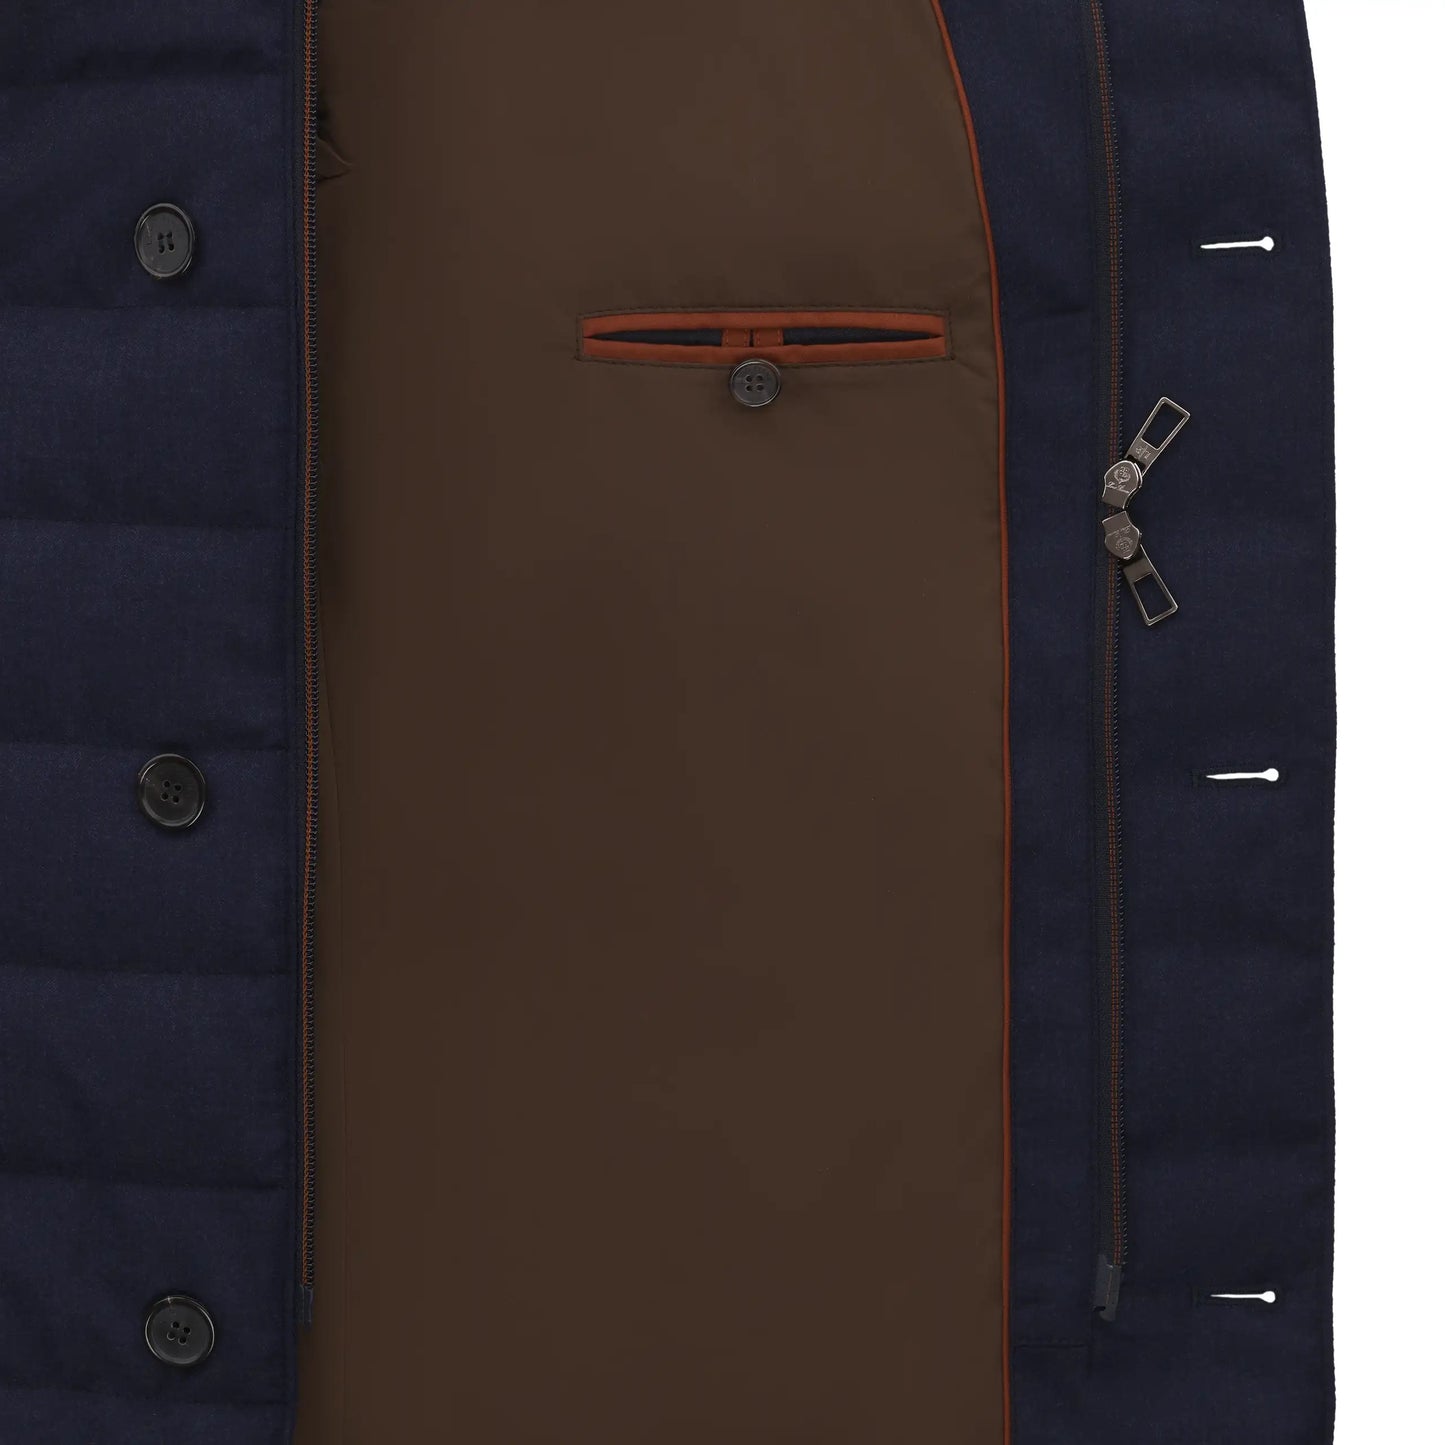 Loro Piana Quilted Roadster Jacket in Indigo Blue - SARTALE